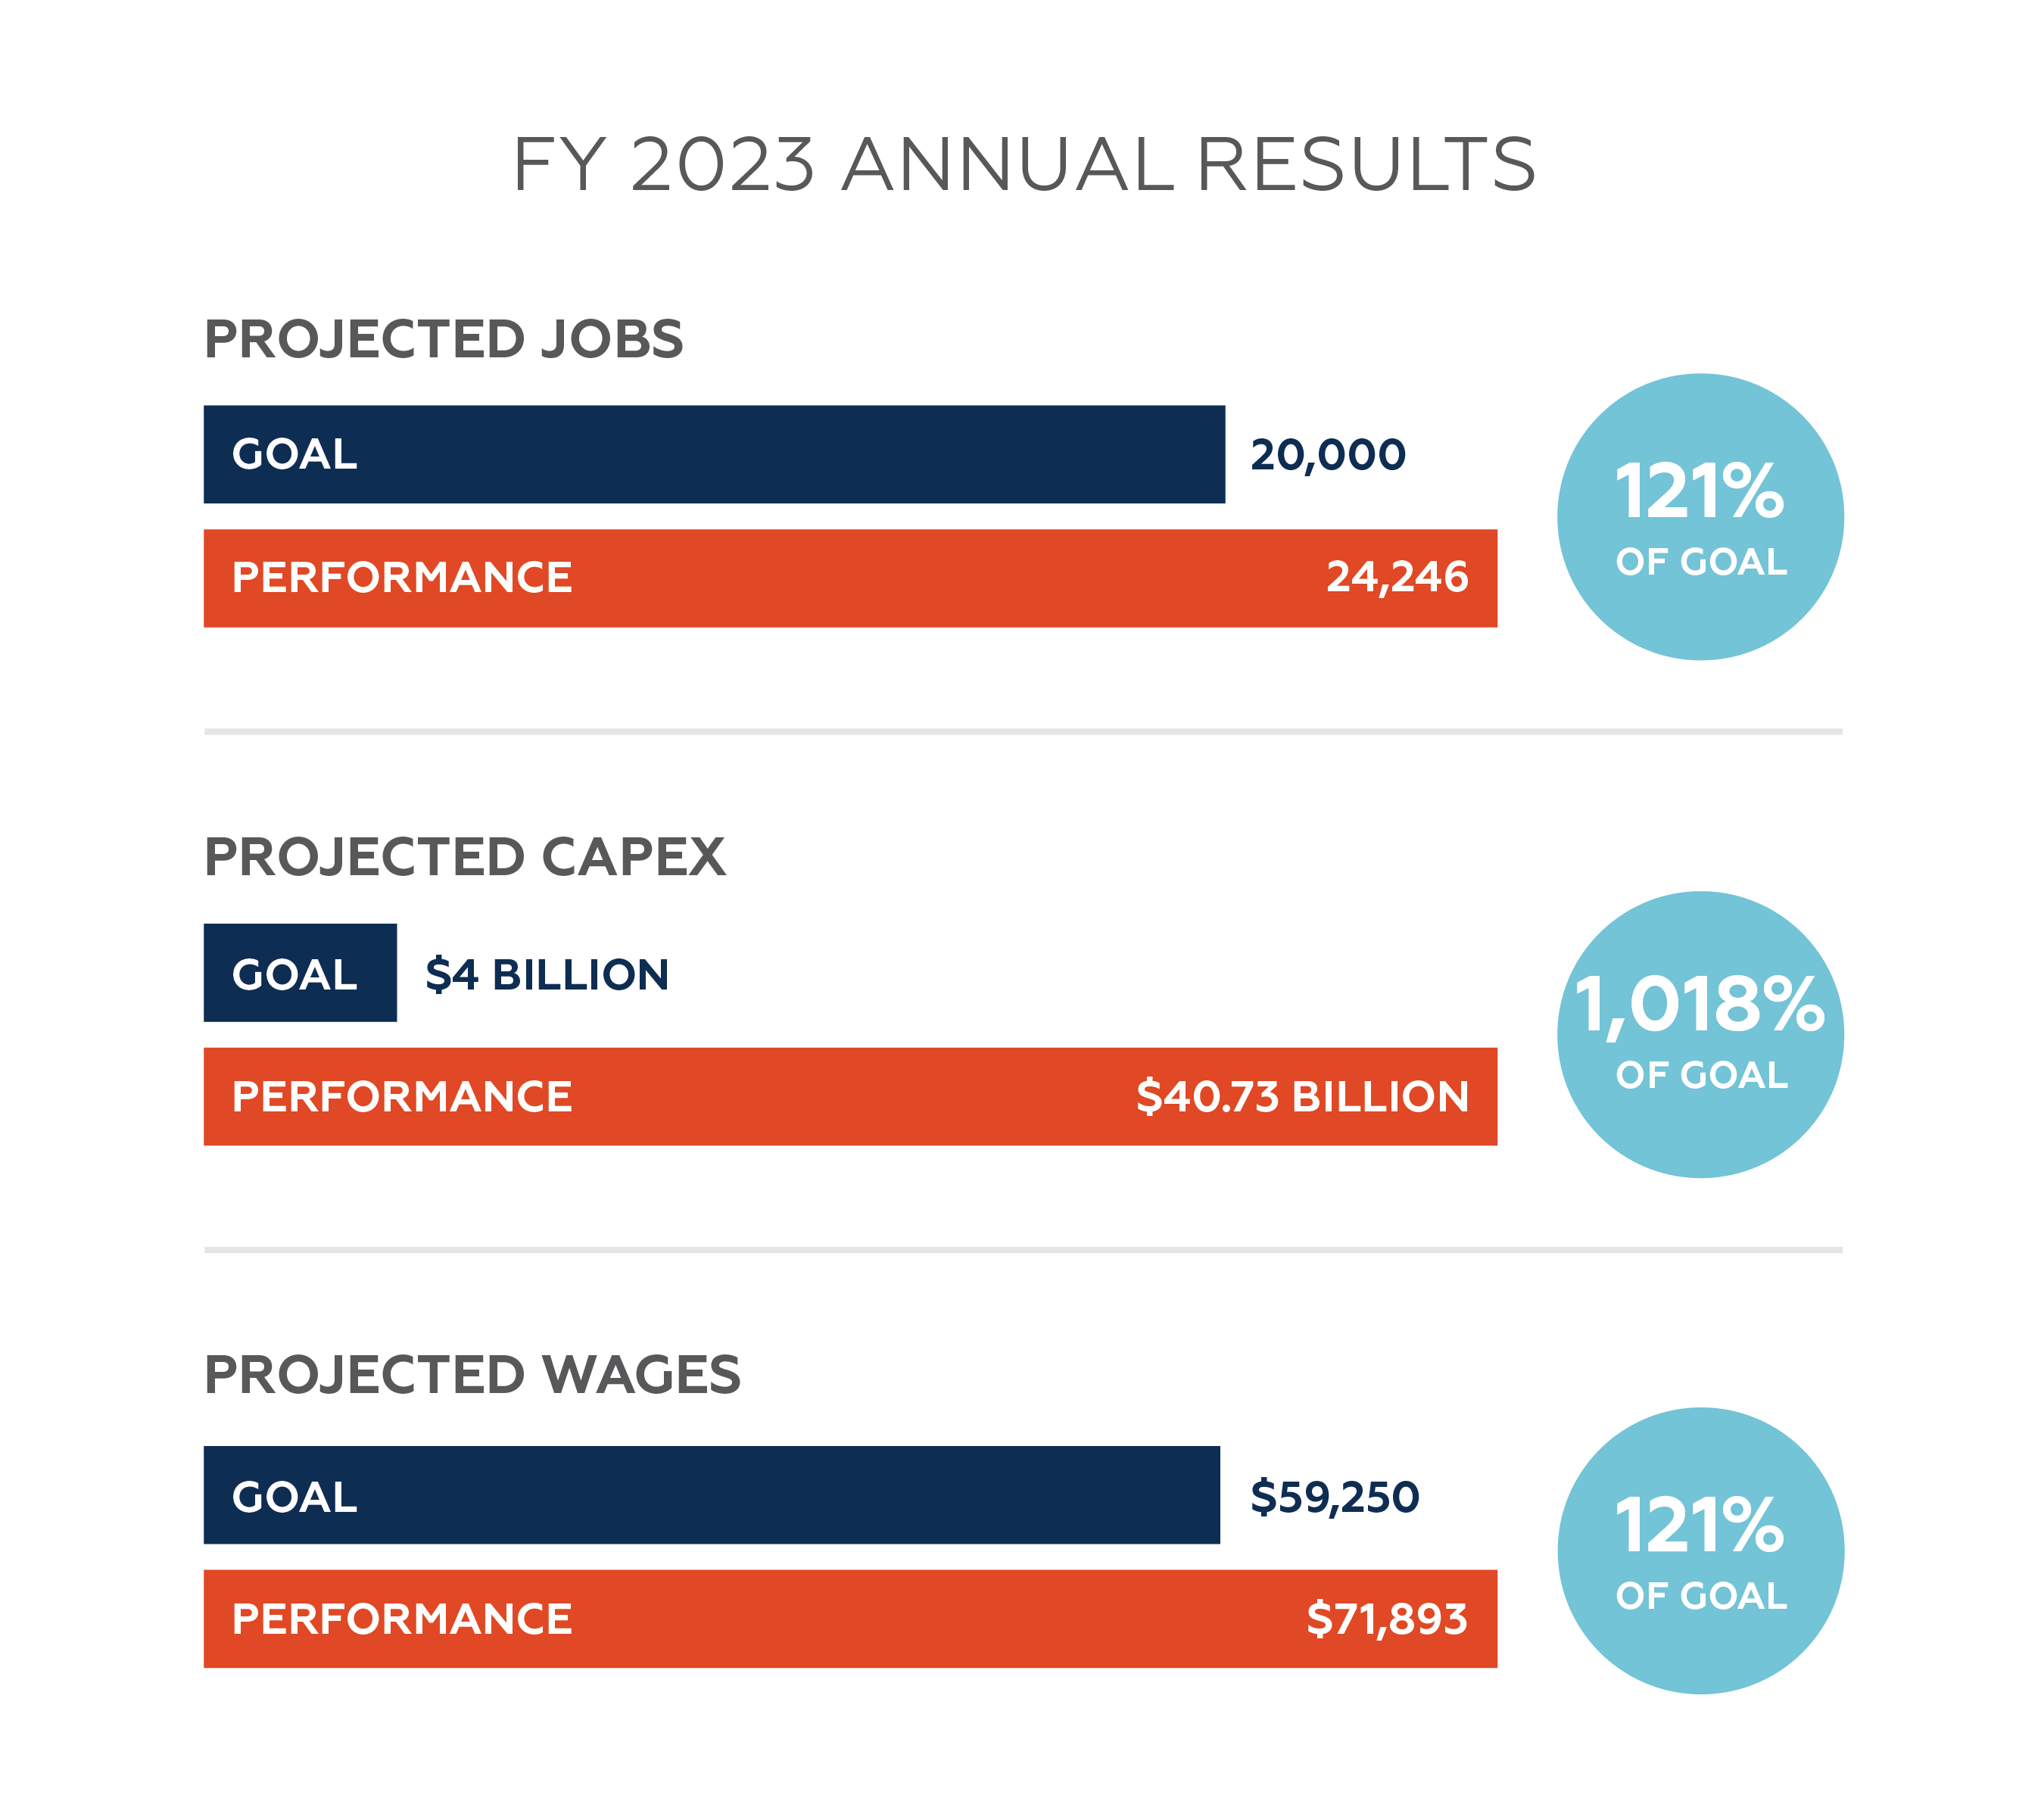 FY23 Annual Results